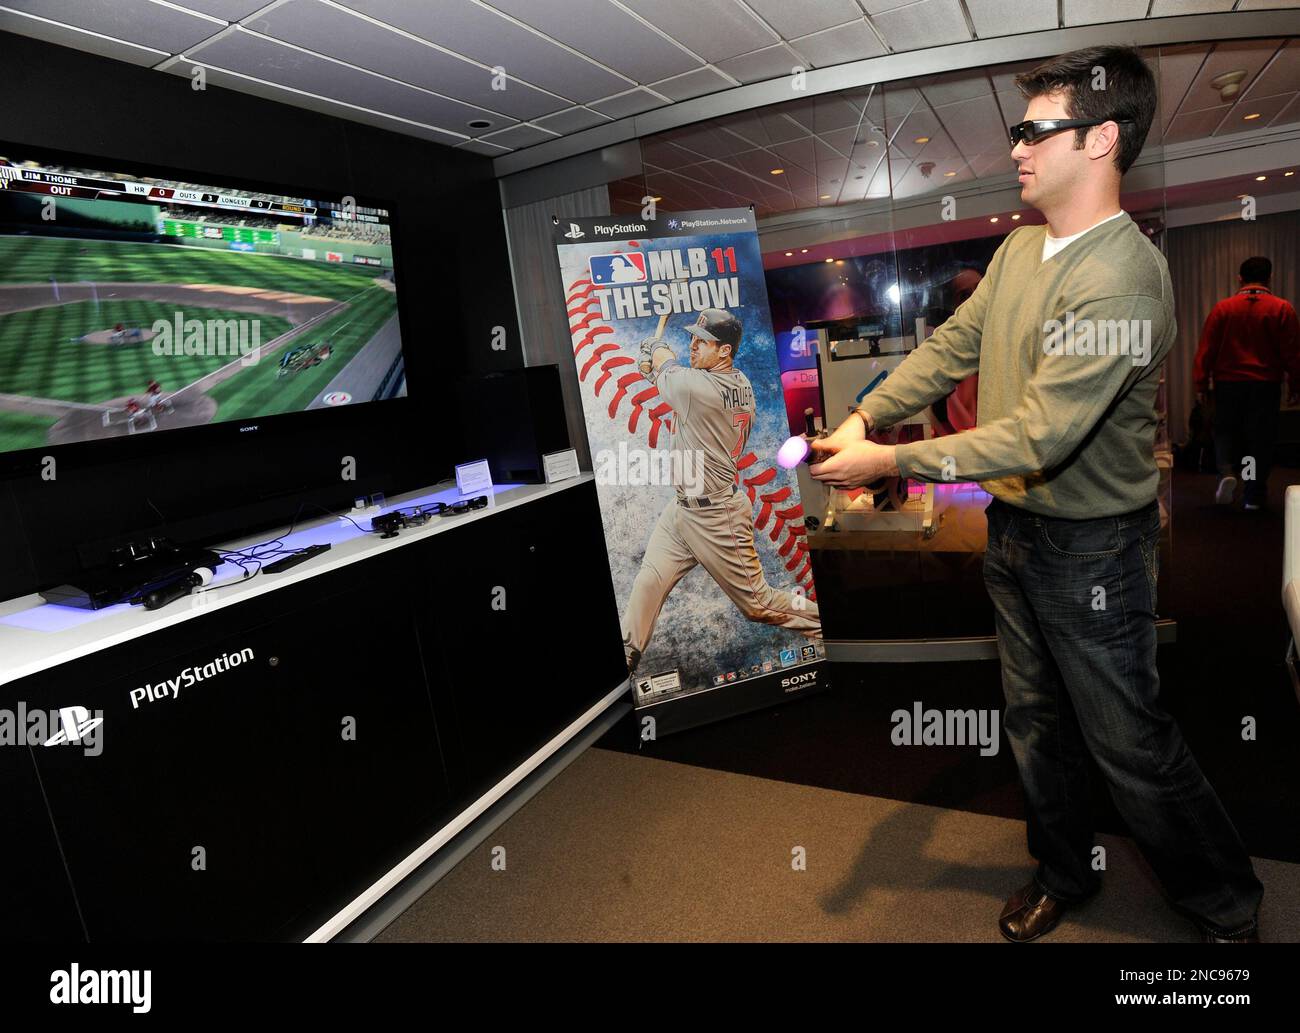 Minnesota Twins All-Star catcher, Joe Mauer, demonstrates the upcoming video game, MLB 11 The Show, available exclusively on PlayStation